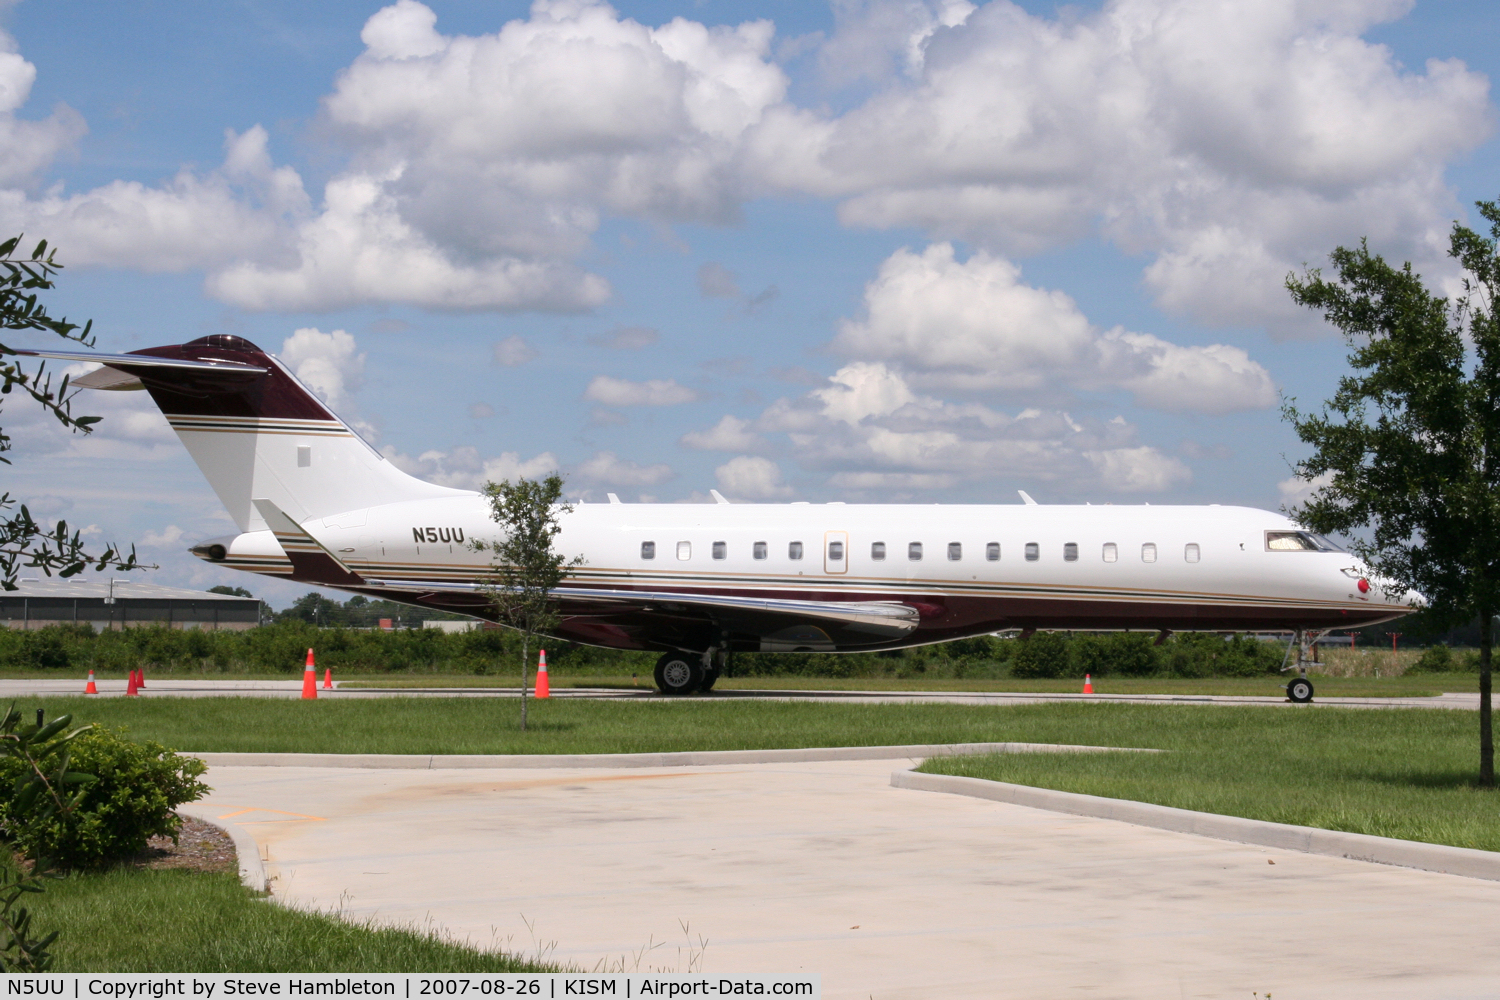 N5UU, 1999 Bombardier BD-700-1A10 Global Express C/N 9029, Nice Globex found amongst the trees at Kissimmee